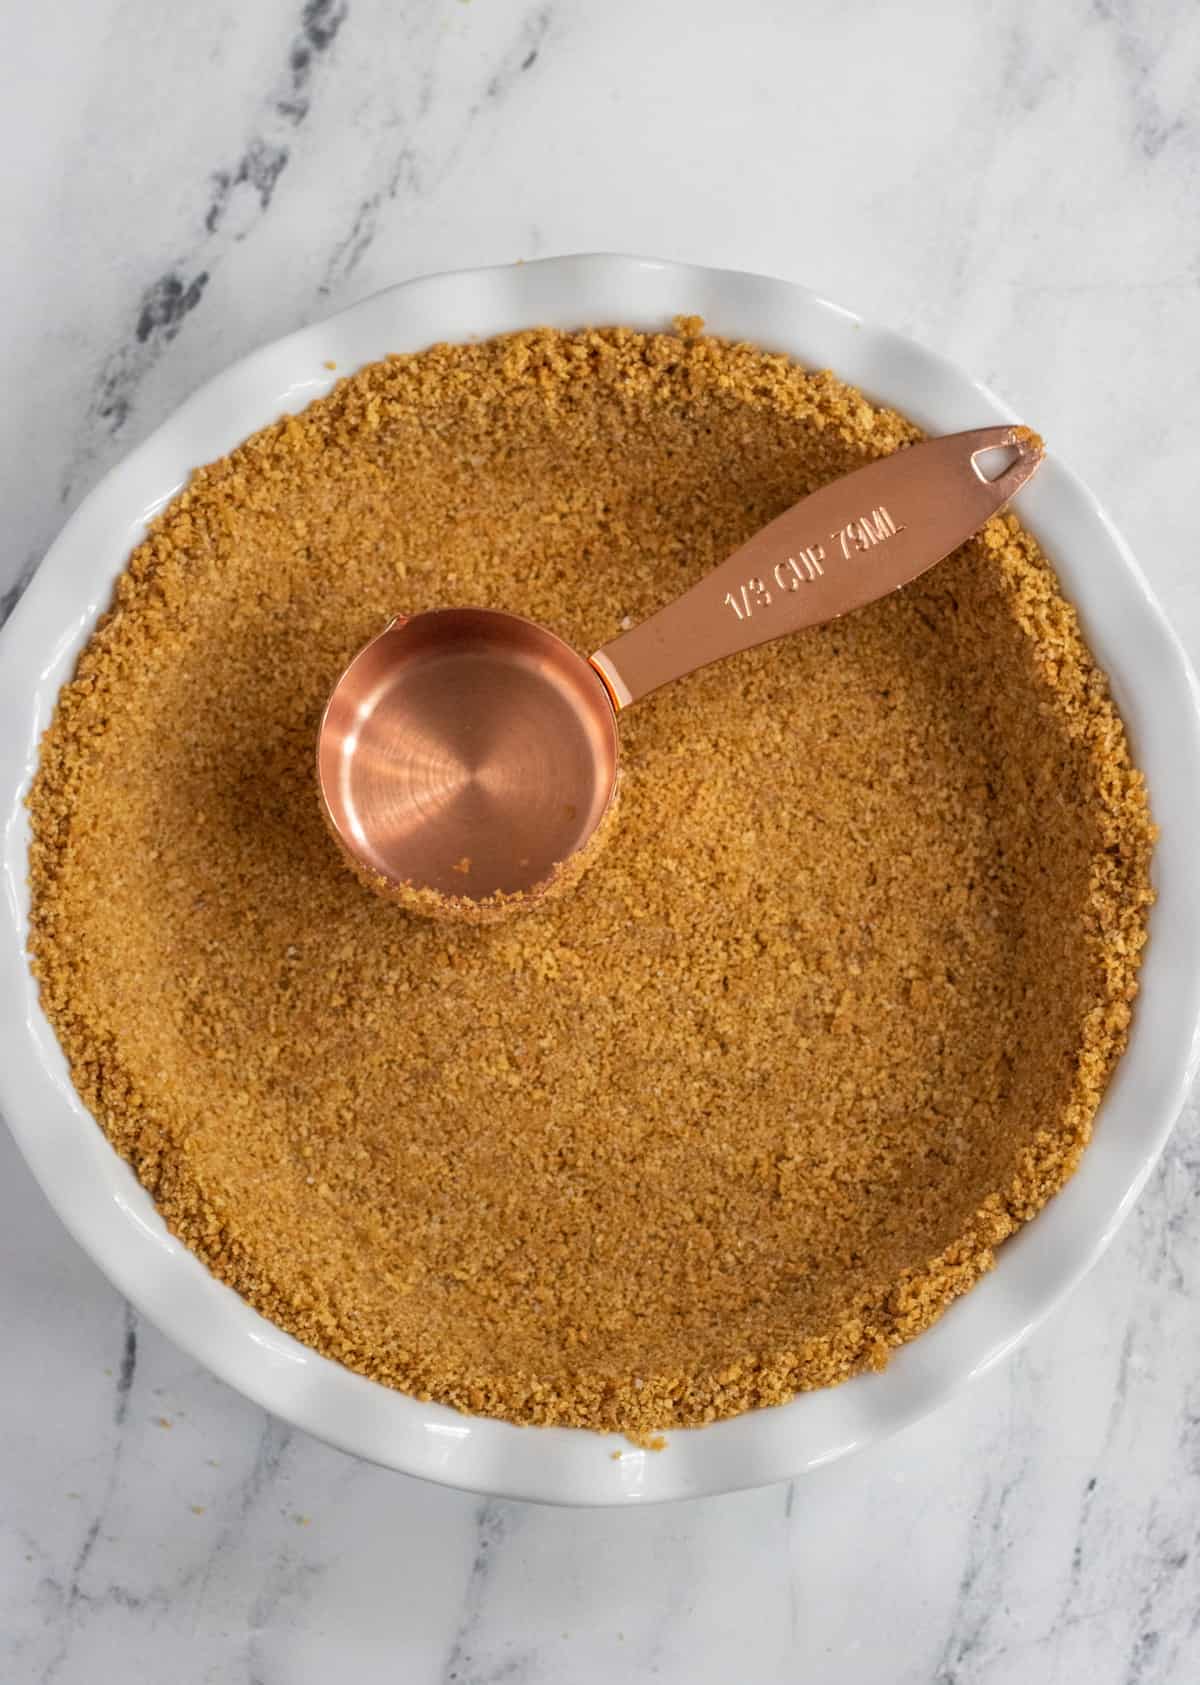 Graham cracker crust being pressed into a pie plate with a measuring cup.